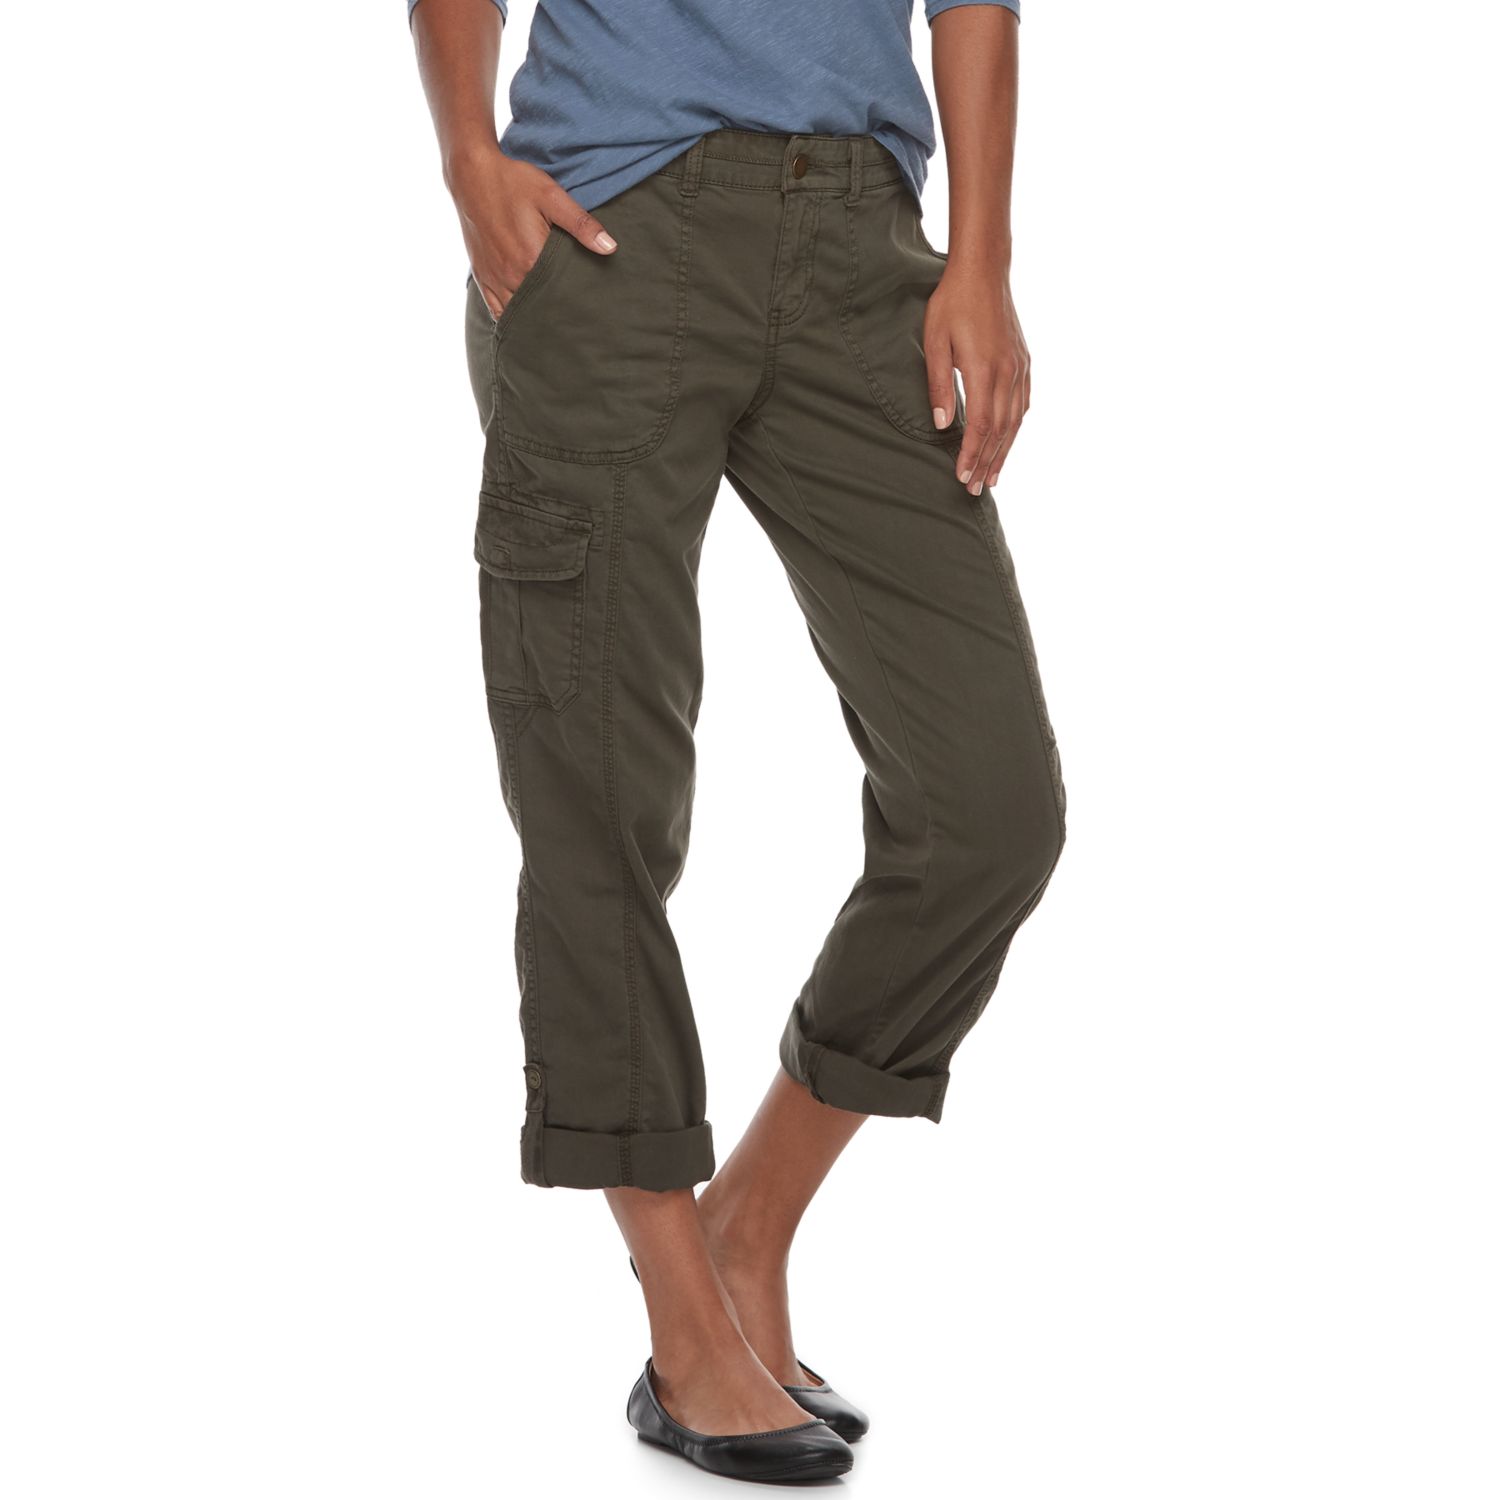 sonoma womens goods for life cargo utility pants